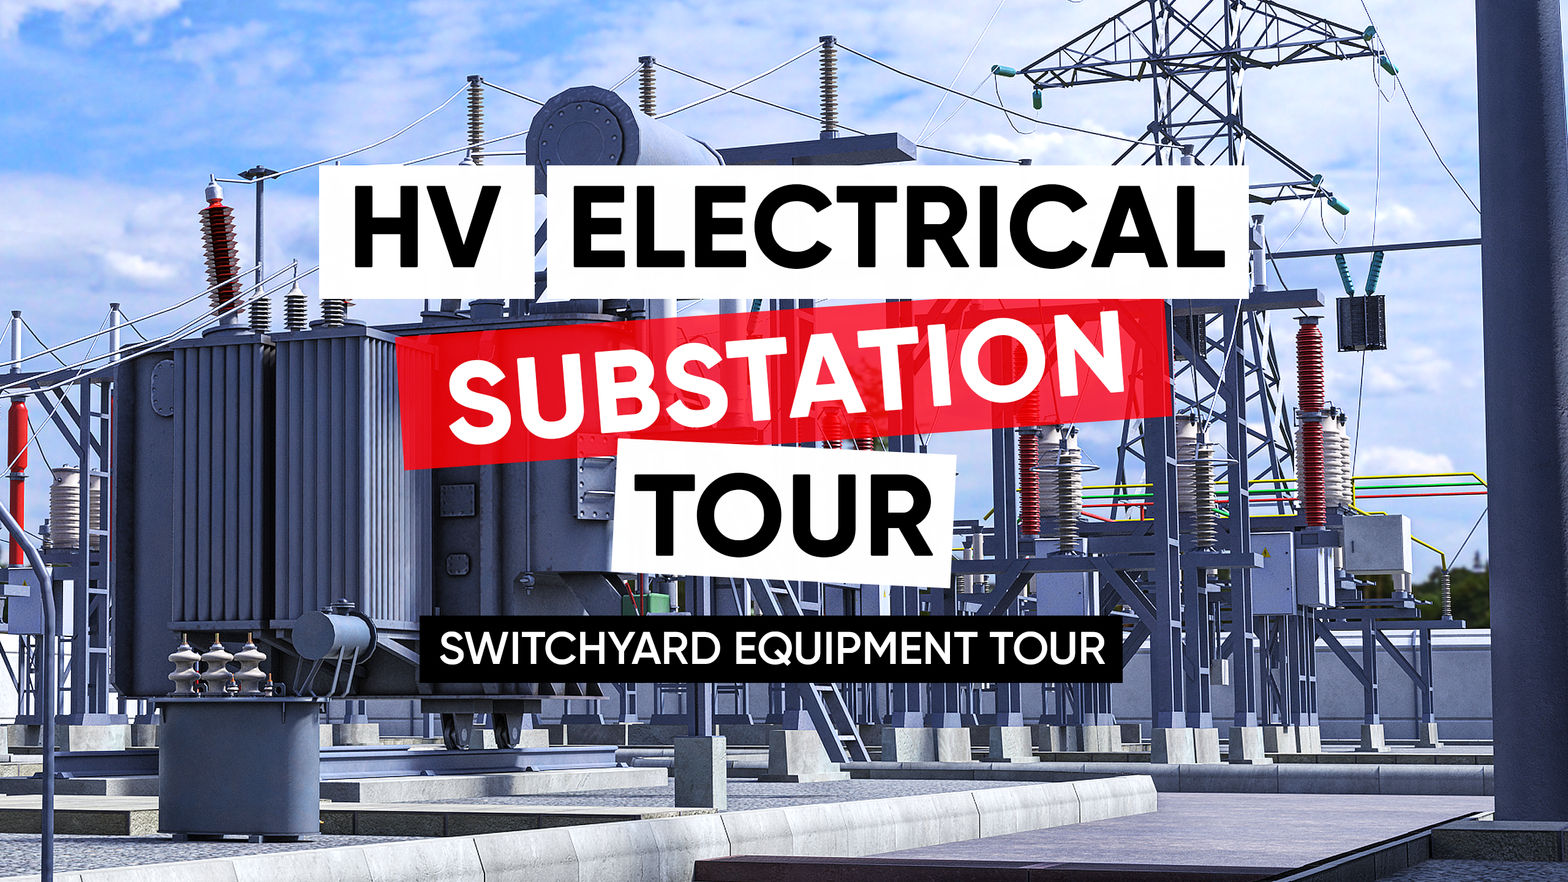 High Voltage Electrical Substation Training